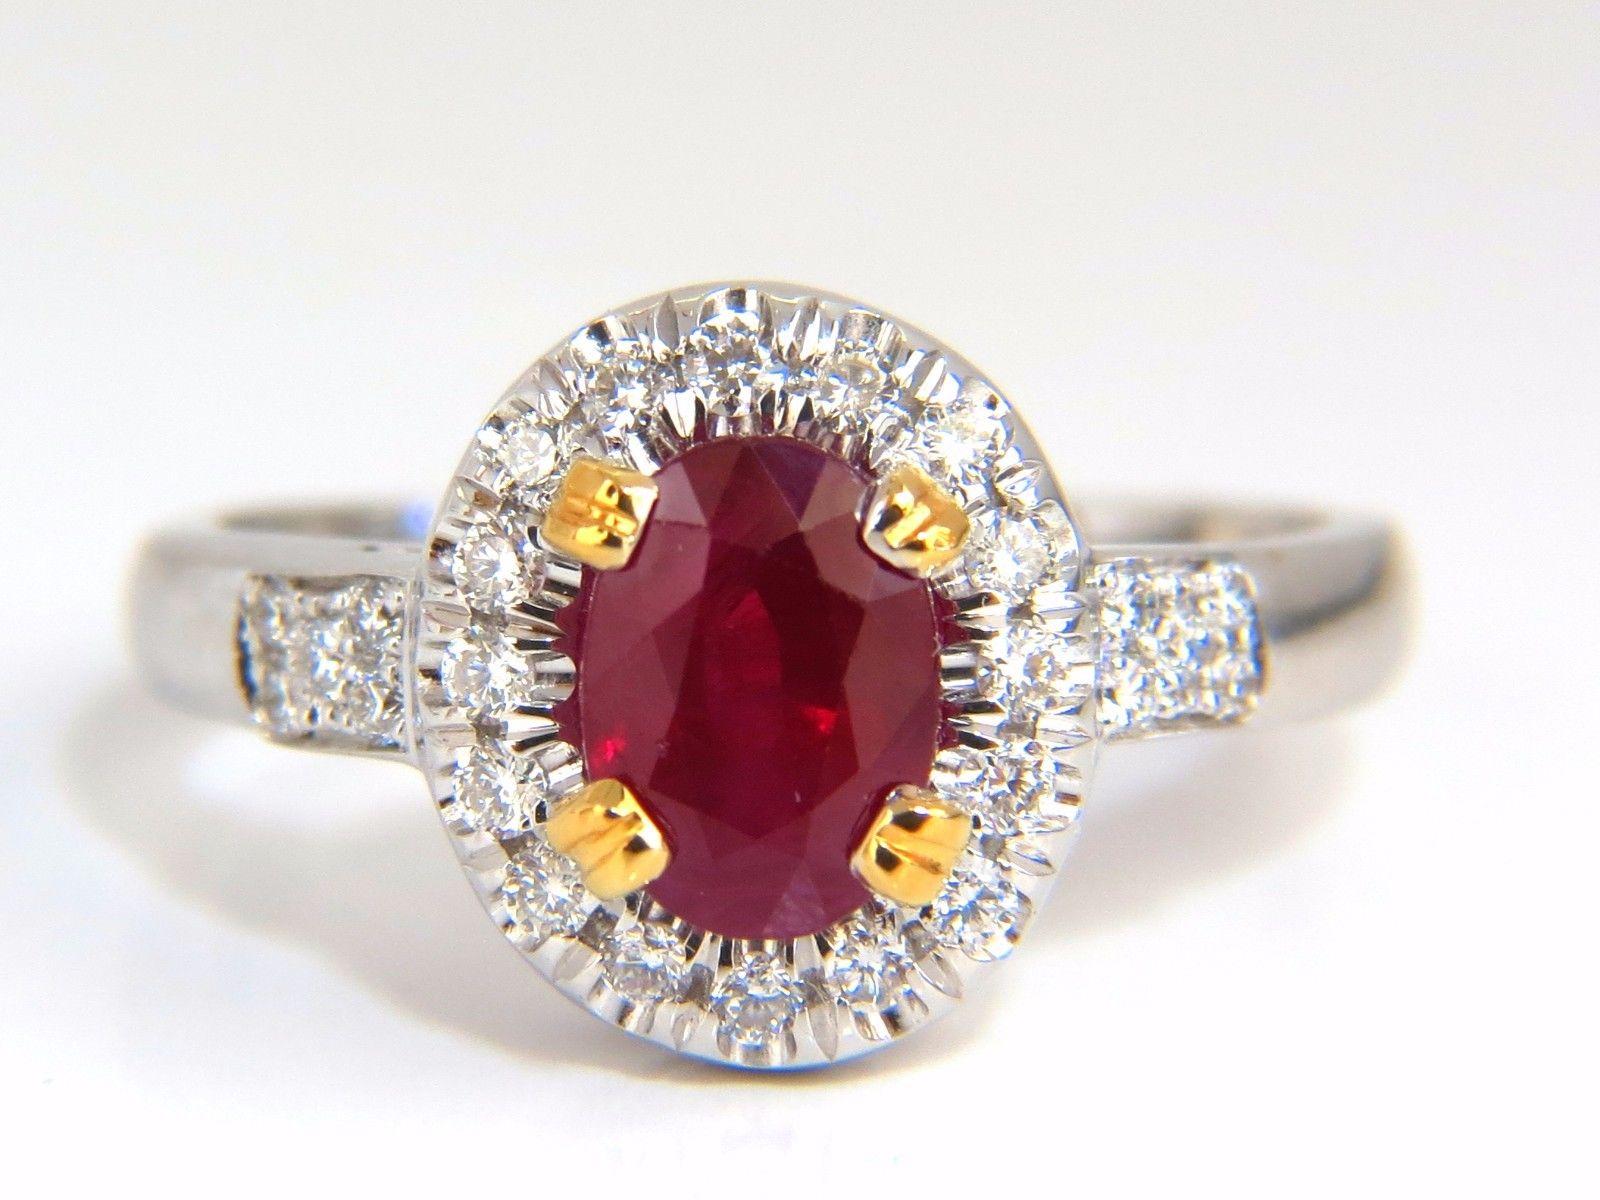 Red Prime Ruby Ring

1.63ct. Natural GIA Certified Ruby Ring

GIA Certified Report ID: 6173627333

7.31 X 5.22 X 4.59mm

Full cut oval brilliant, Transparent

The Vivid Red & Origin Tested.



.32ct. Diamonds.

Round, Baguettes & full cuts 

G-color